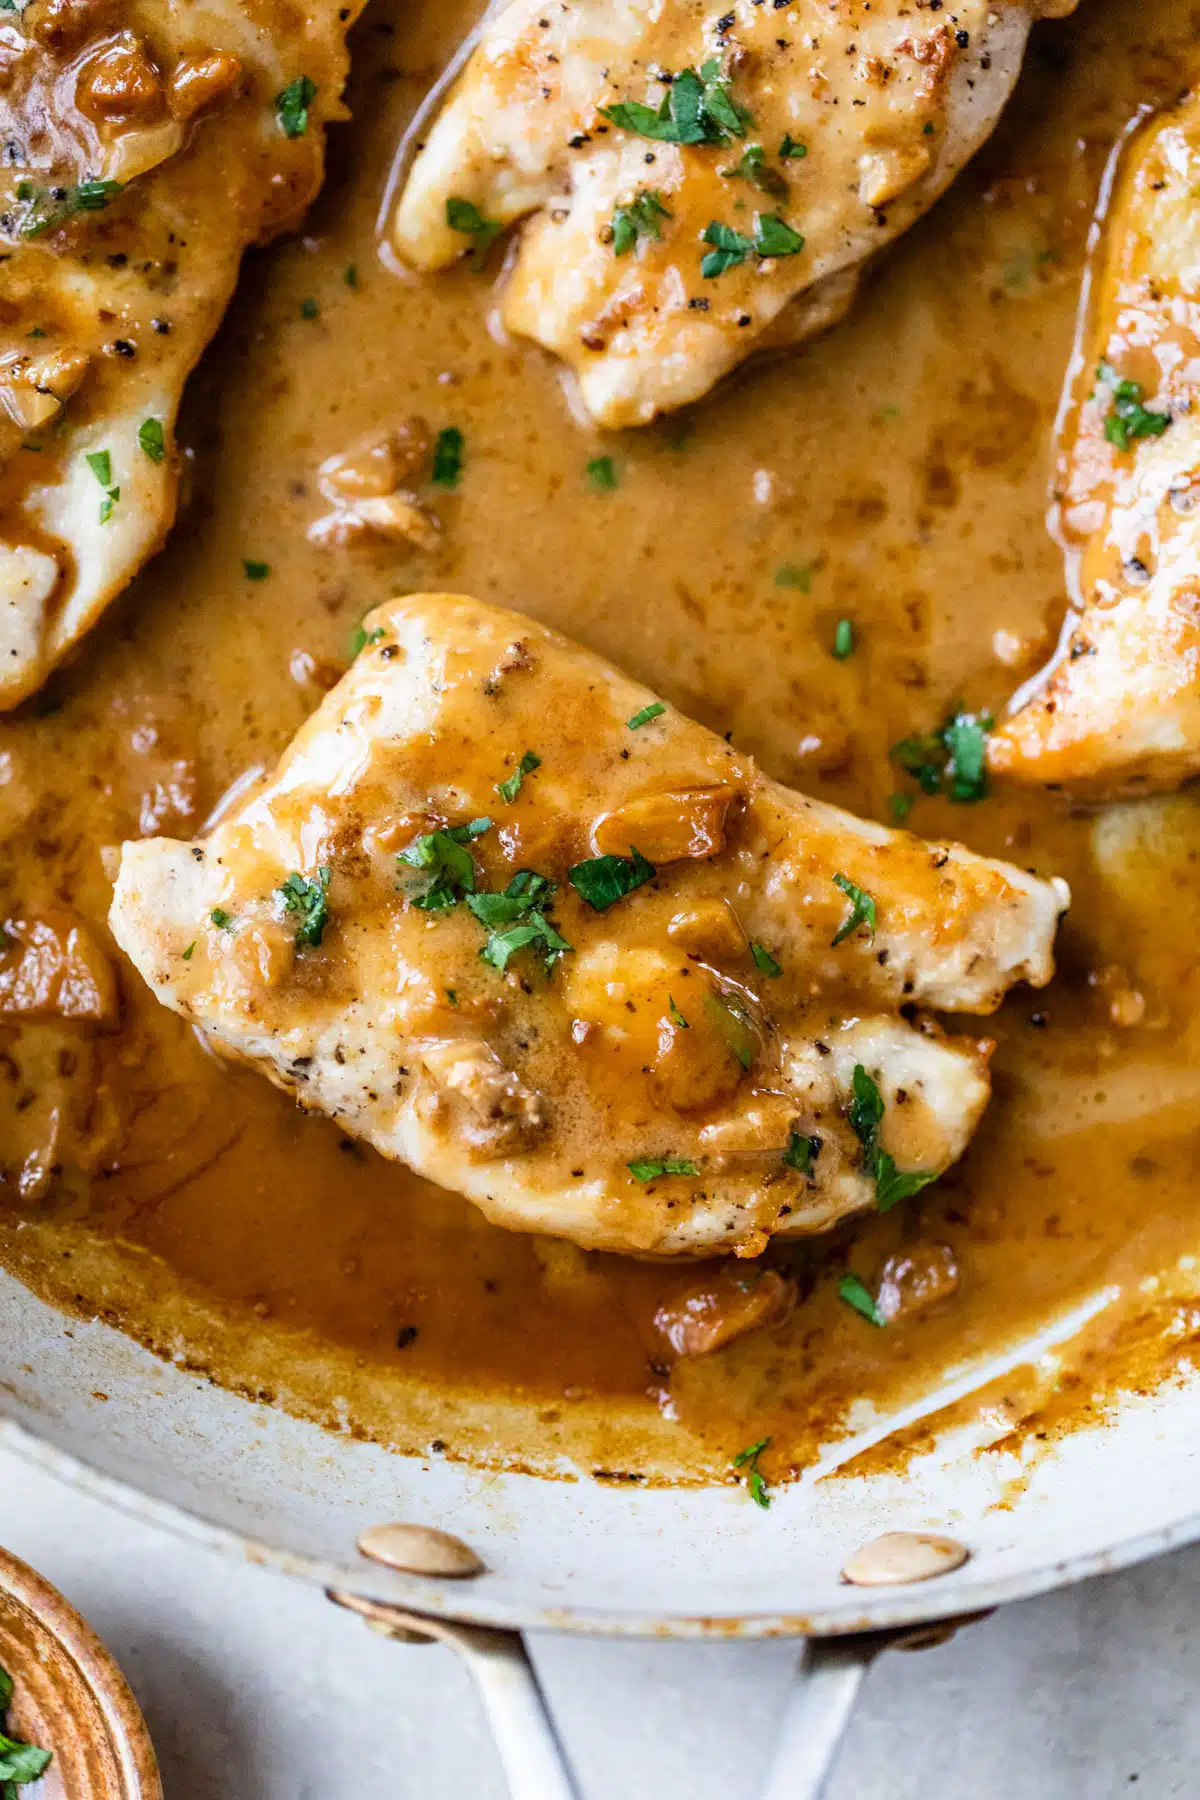 chicken breasts in a skillet with an orange and brown-colored sauce overtop